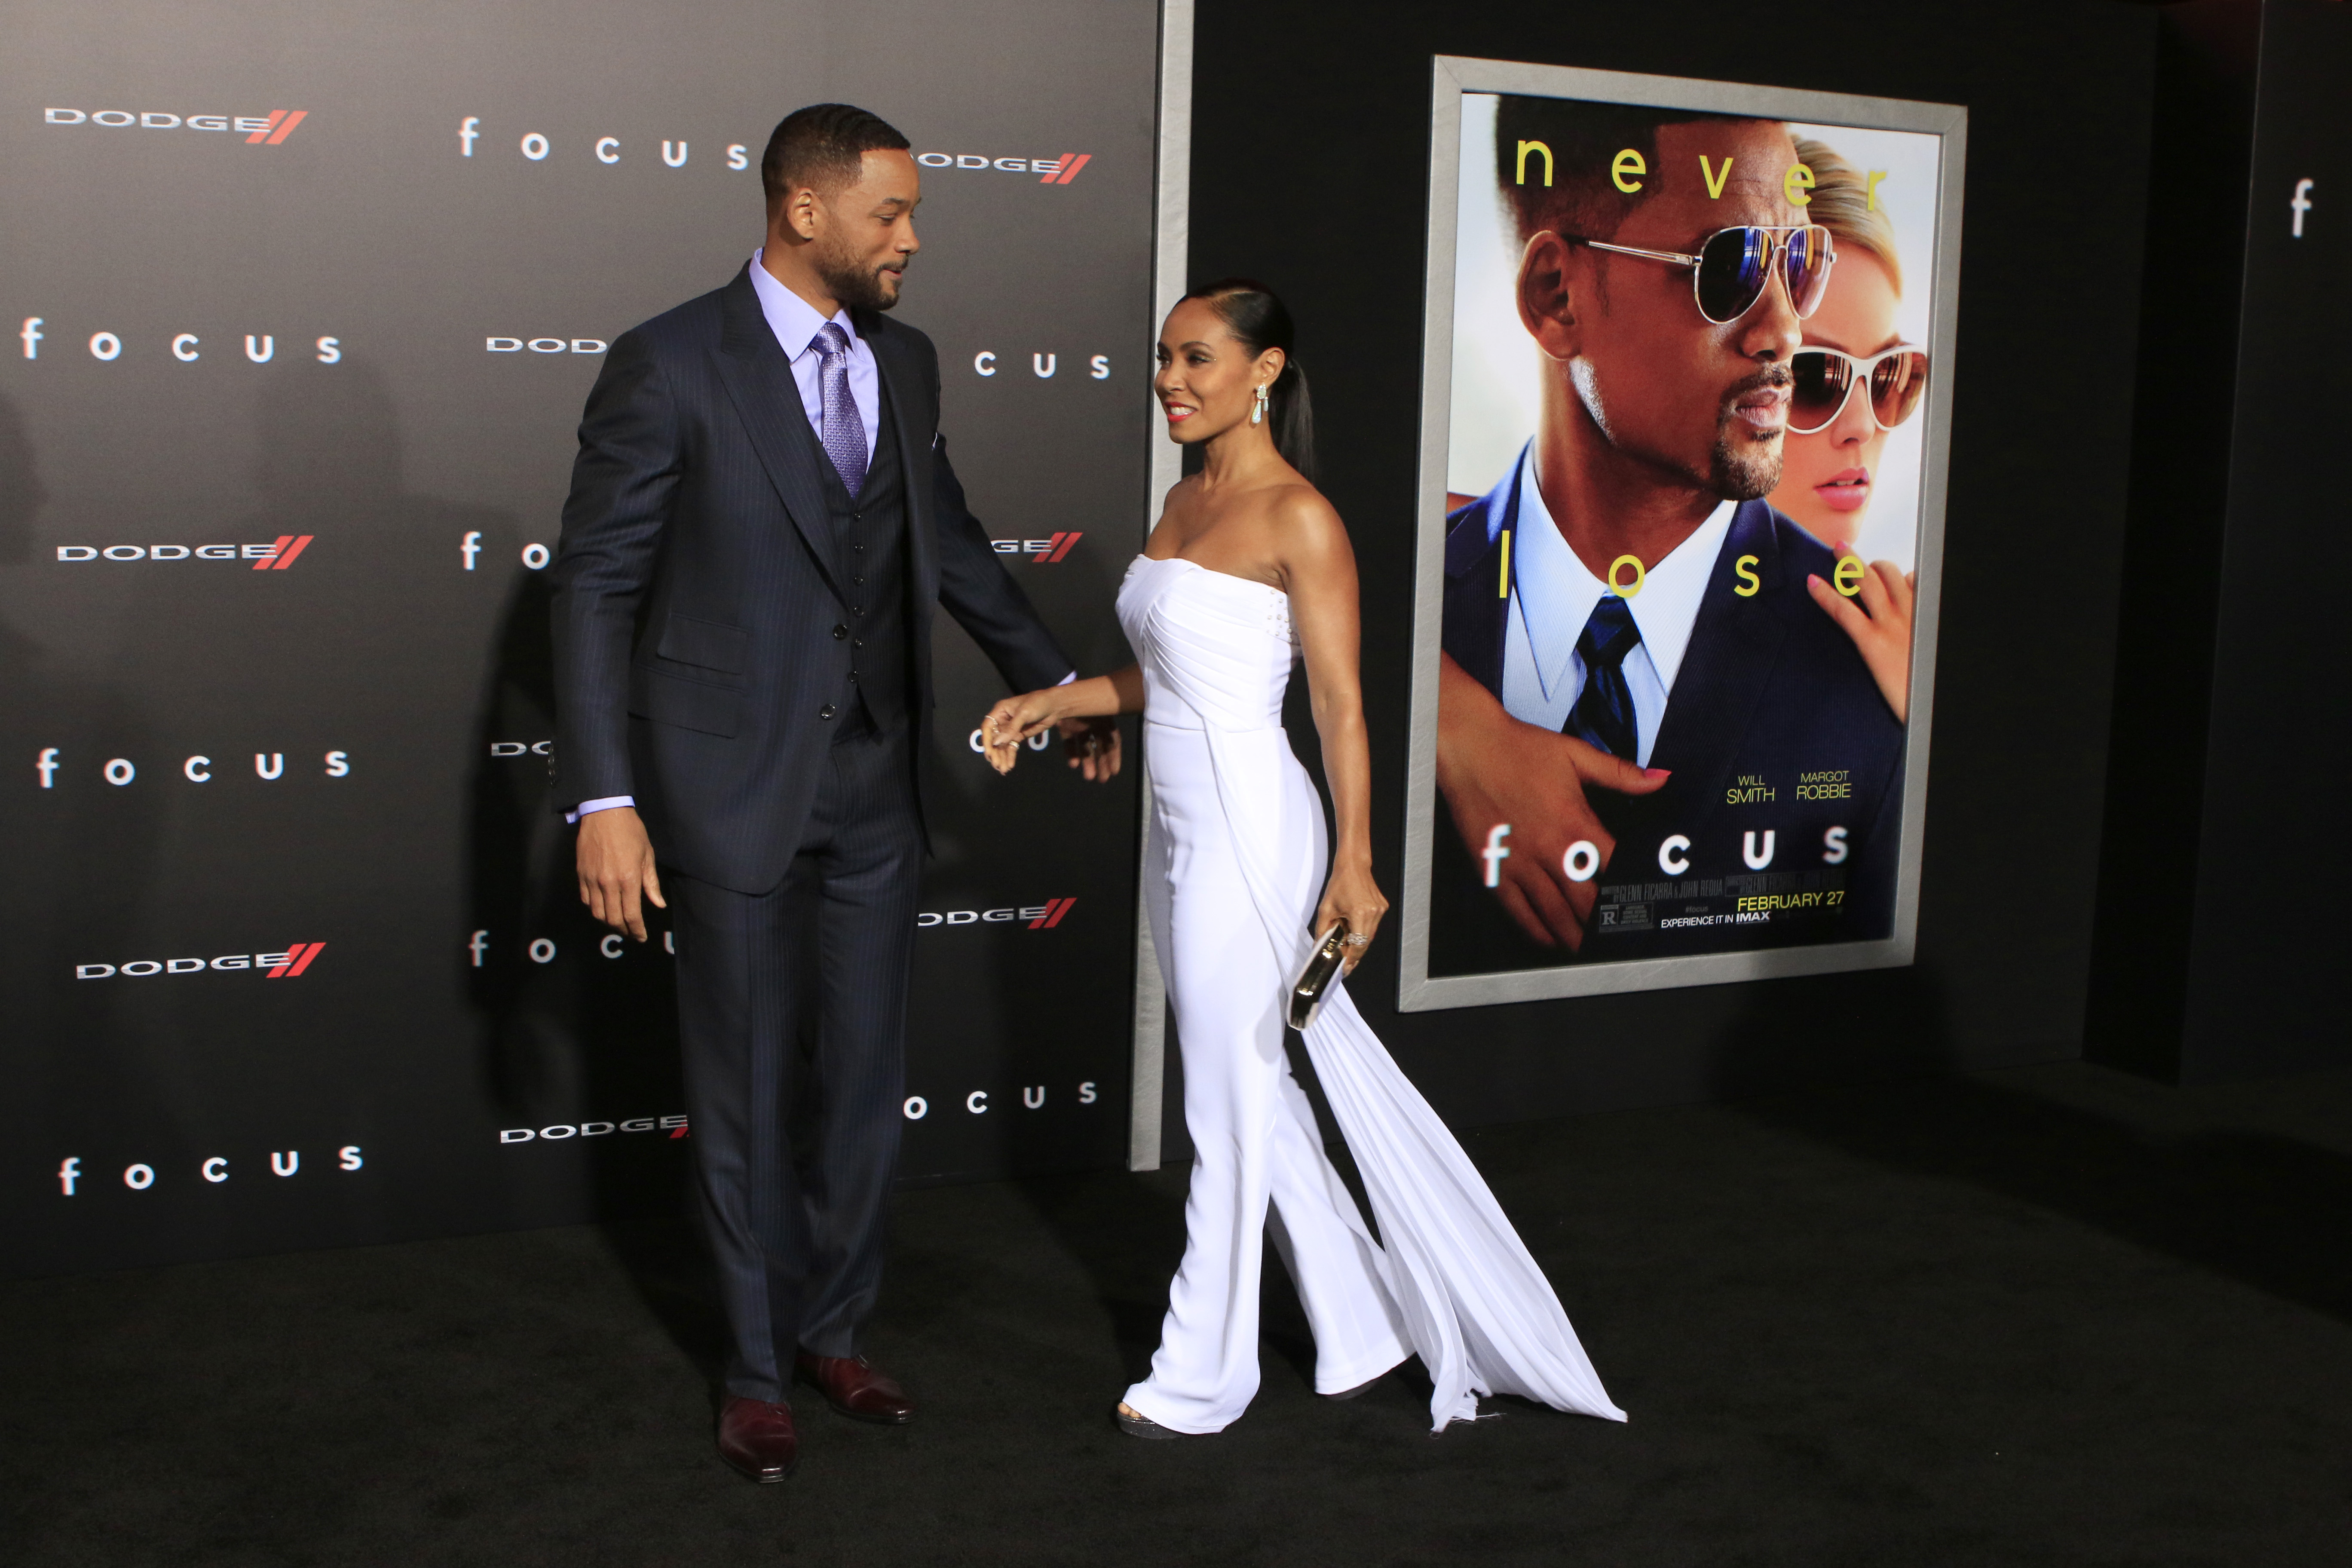 Will and Jada Pinkett Smith attend a red carpet event for a movie premiere